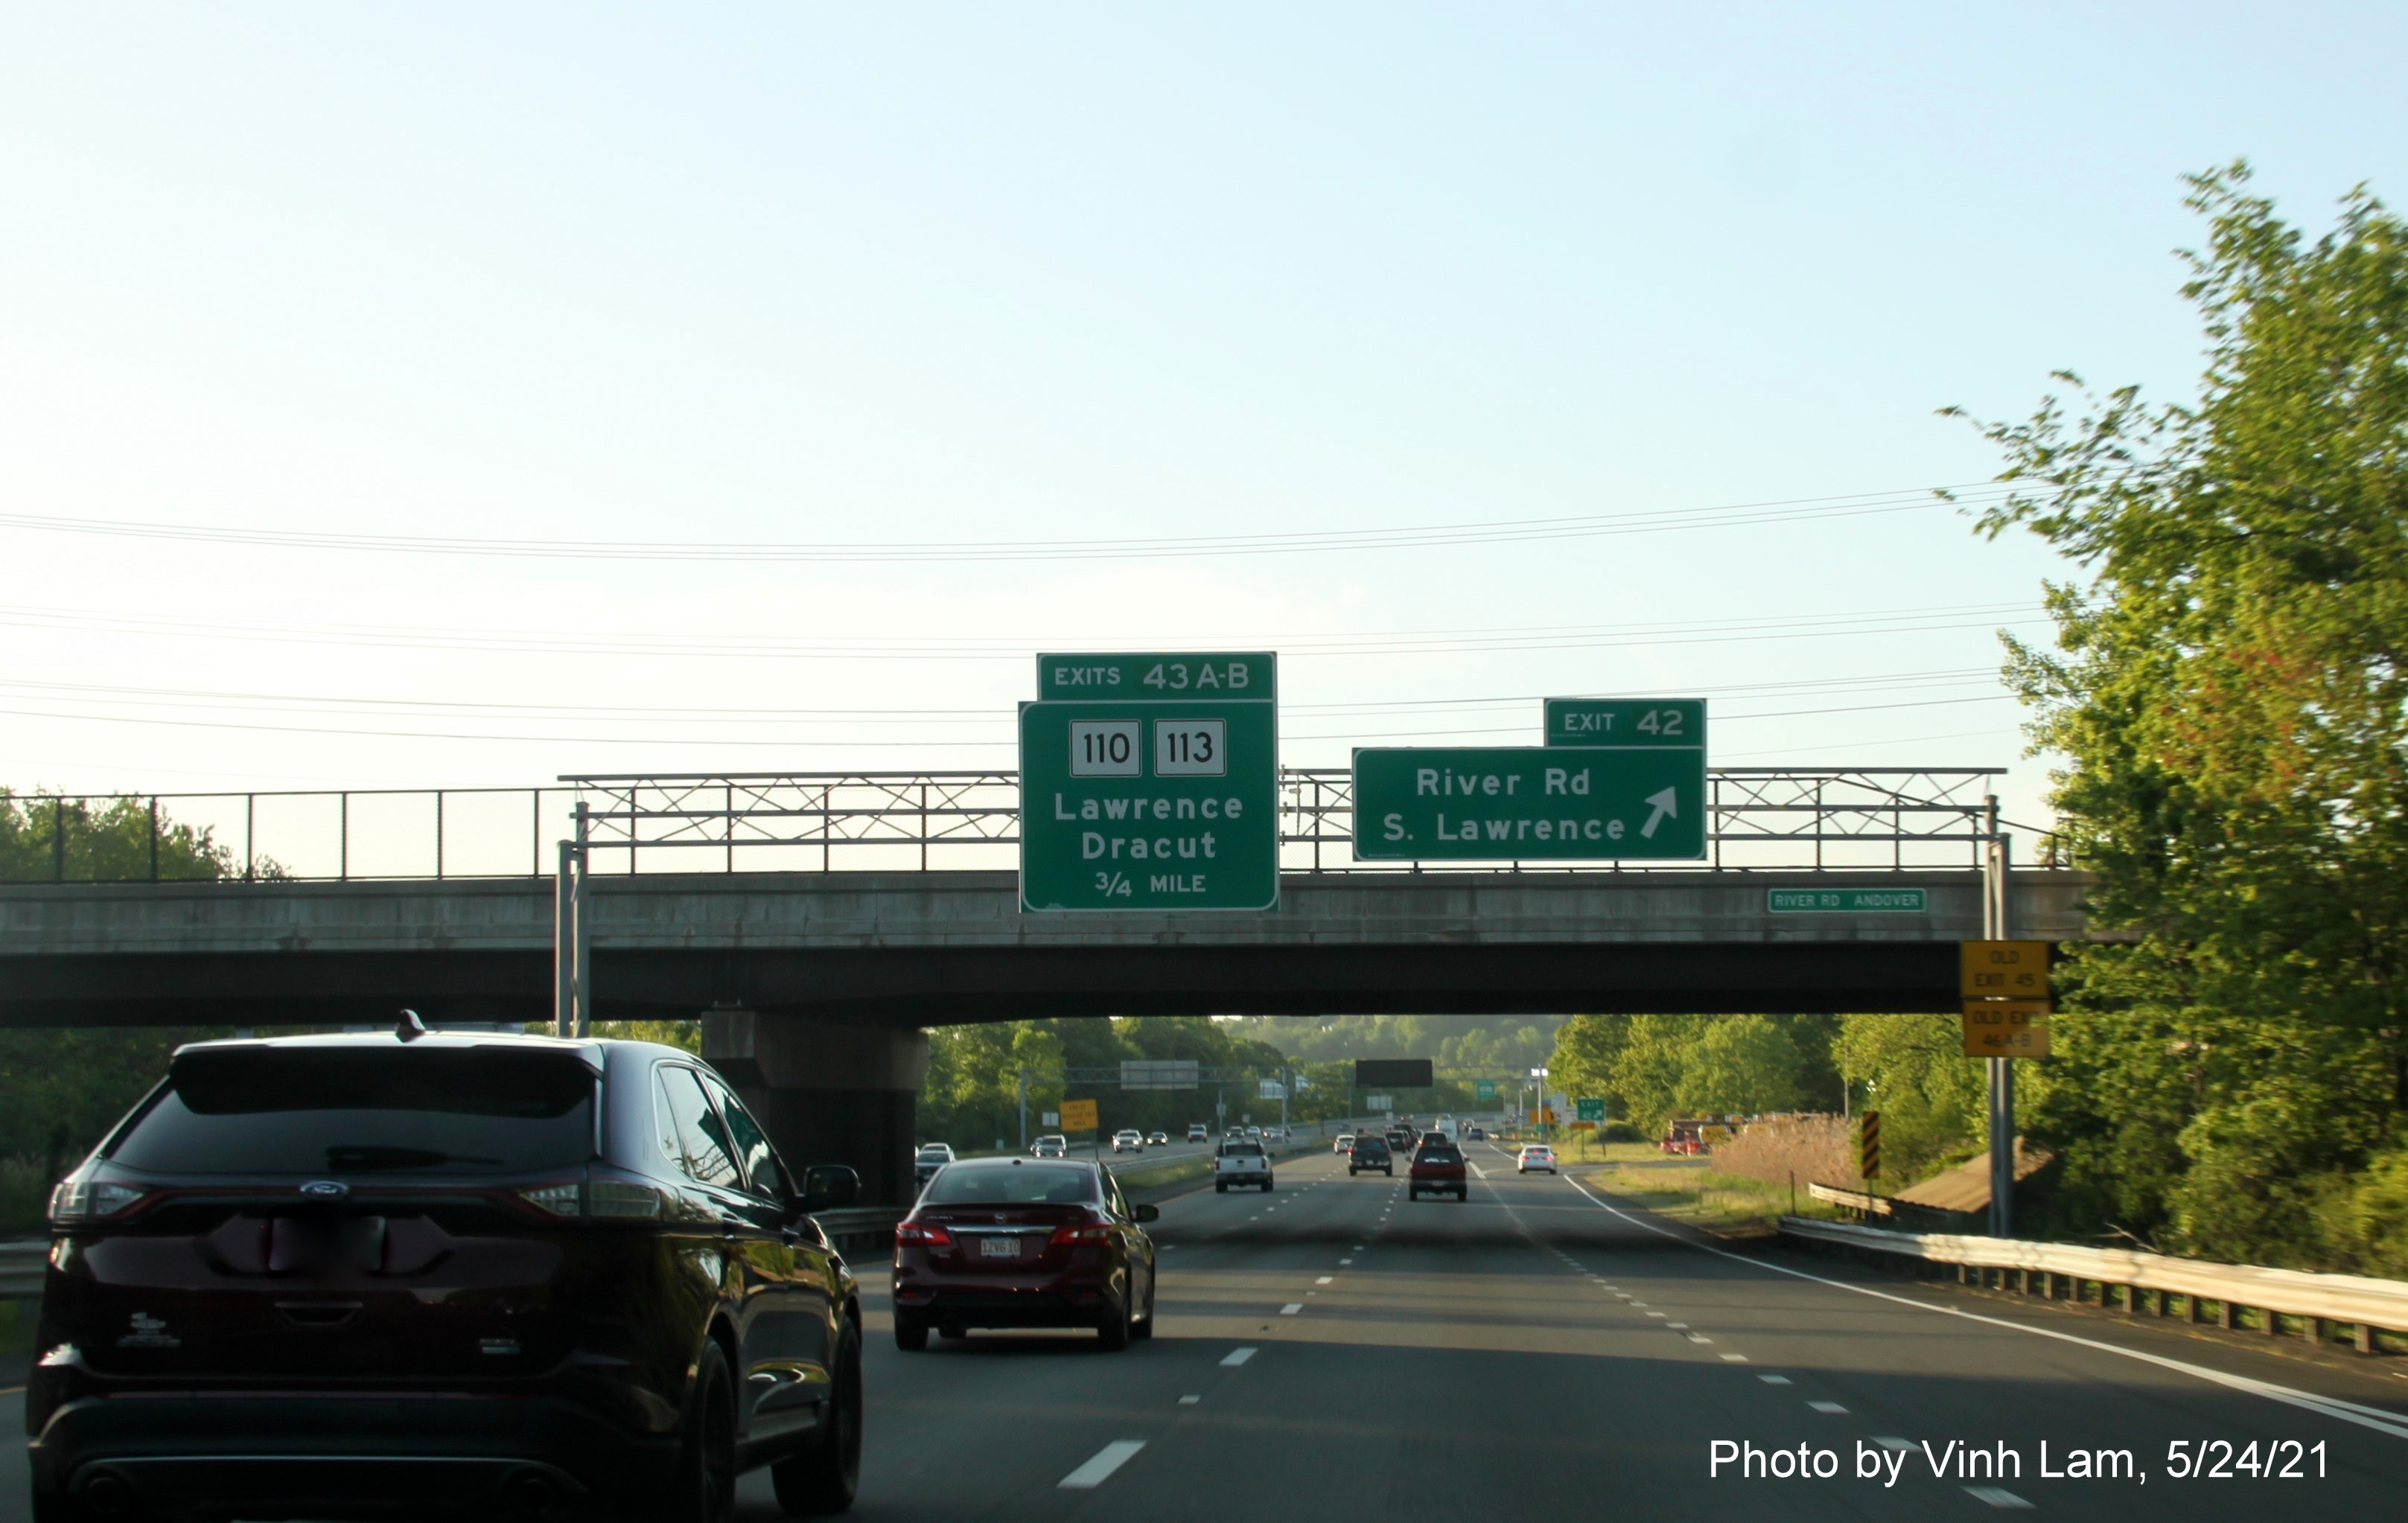 Image of overhead signage at ramp for River Road exit with new milepost based exit numbers on I-93 North in Andover, by Vinh Lam, May 2021